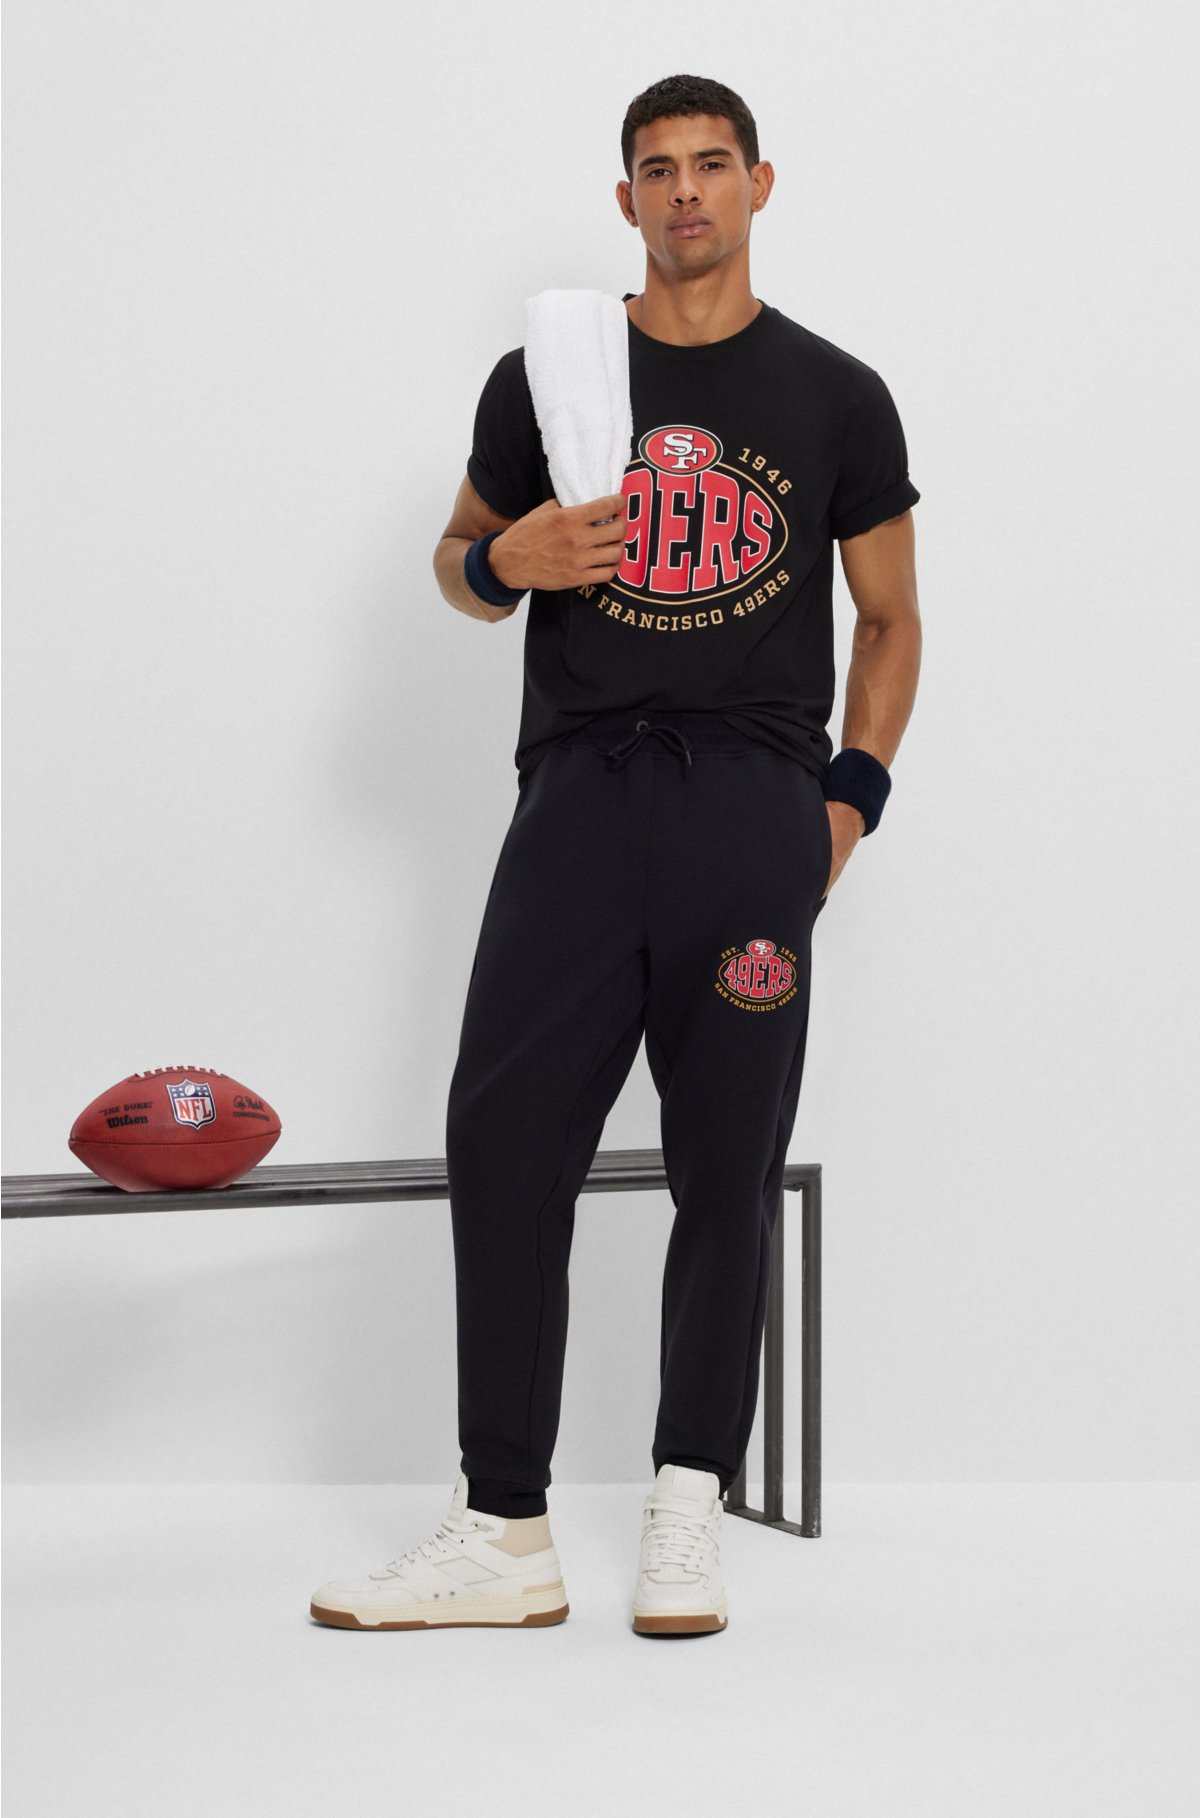 BOSS x NFL cotton-blend tracksuit bottoms with collaborative branding, 49ers